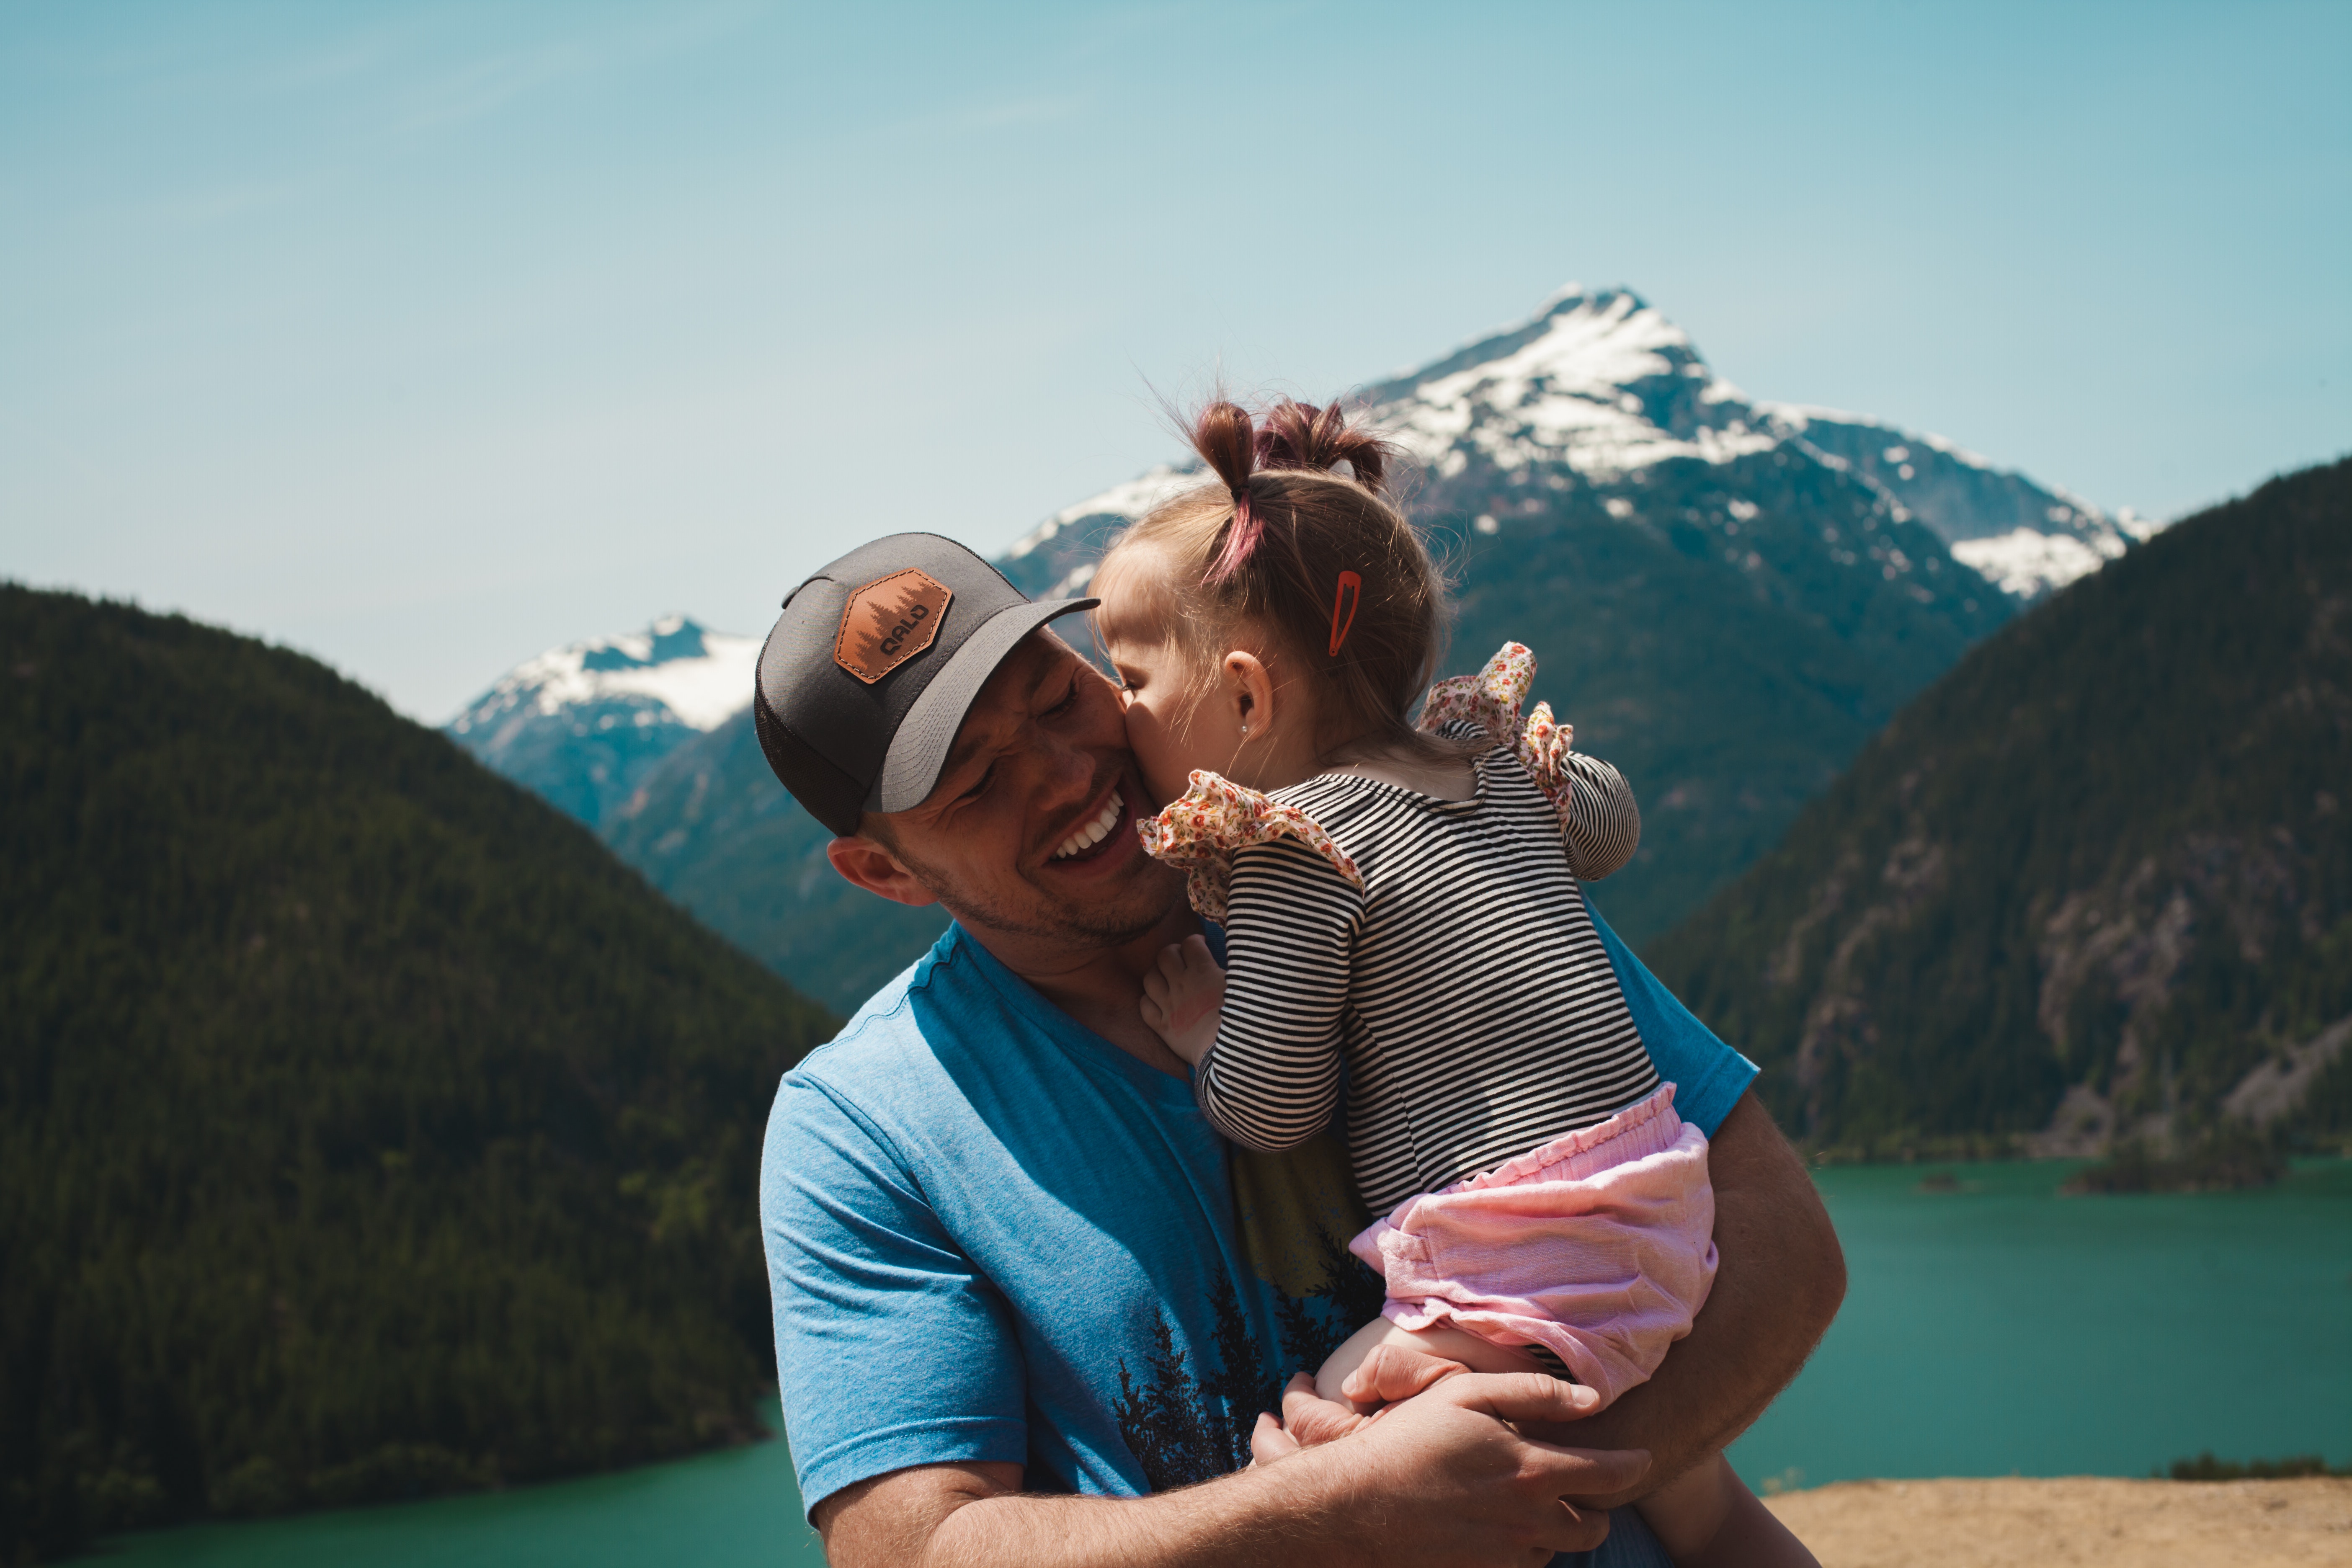 The dad seemed to favor his daughter. | Source: Pexels